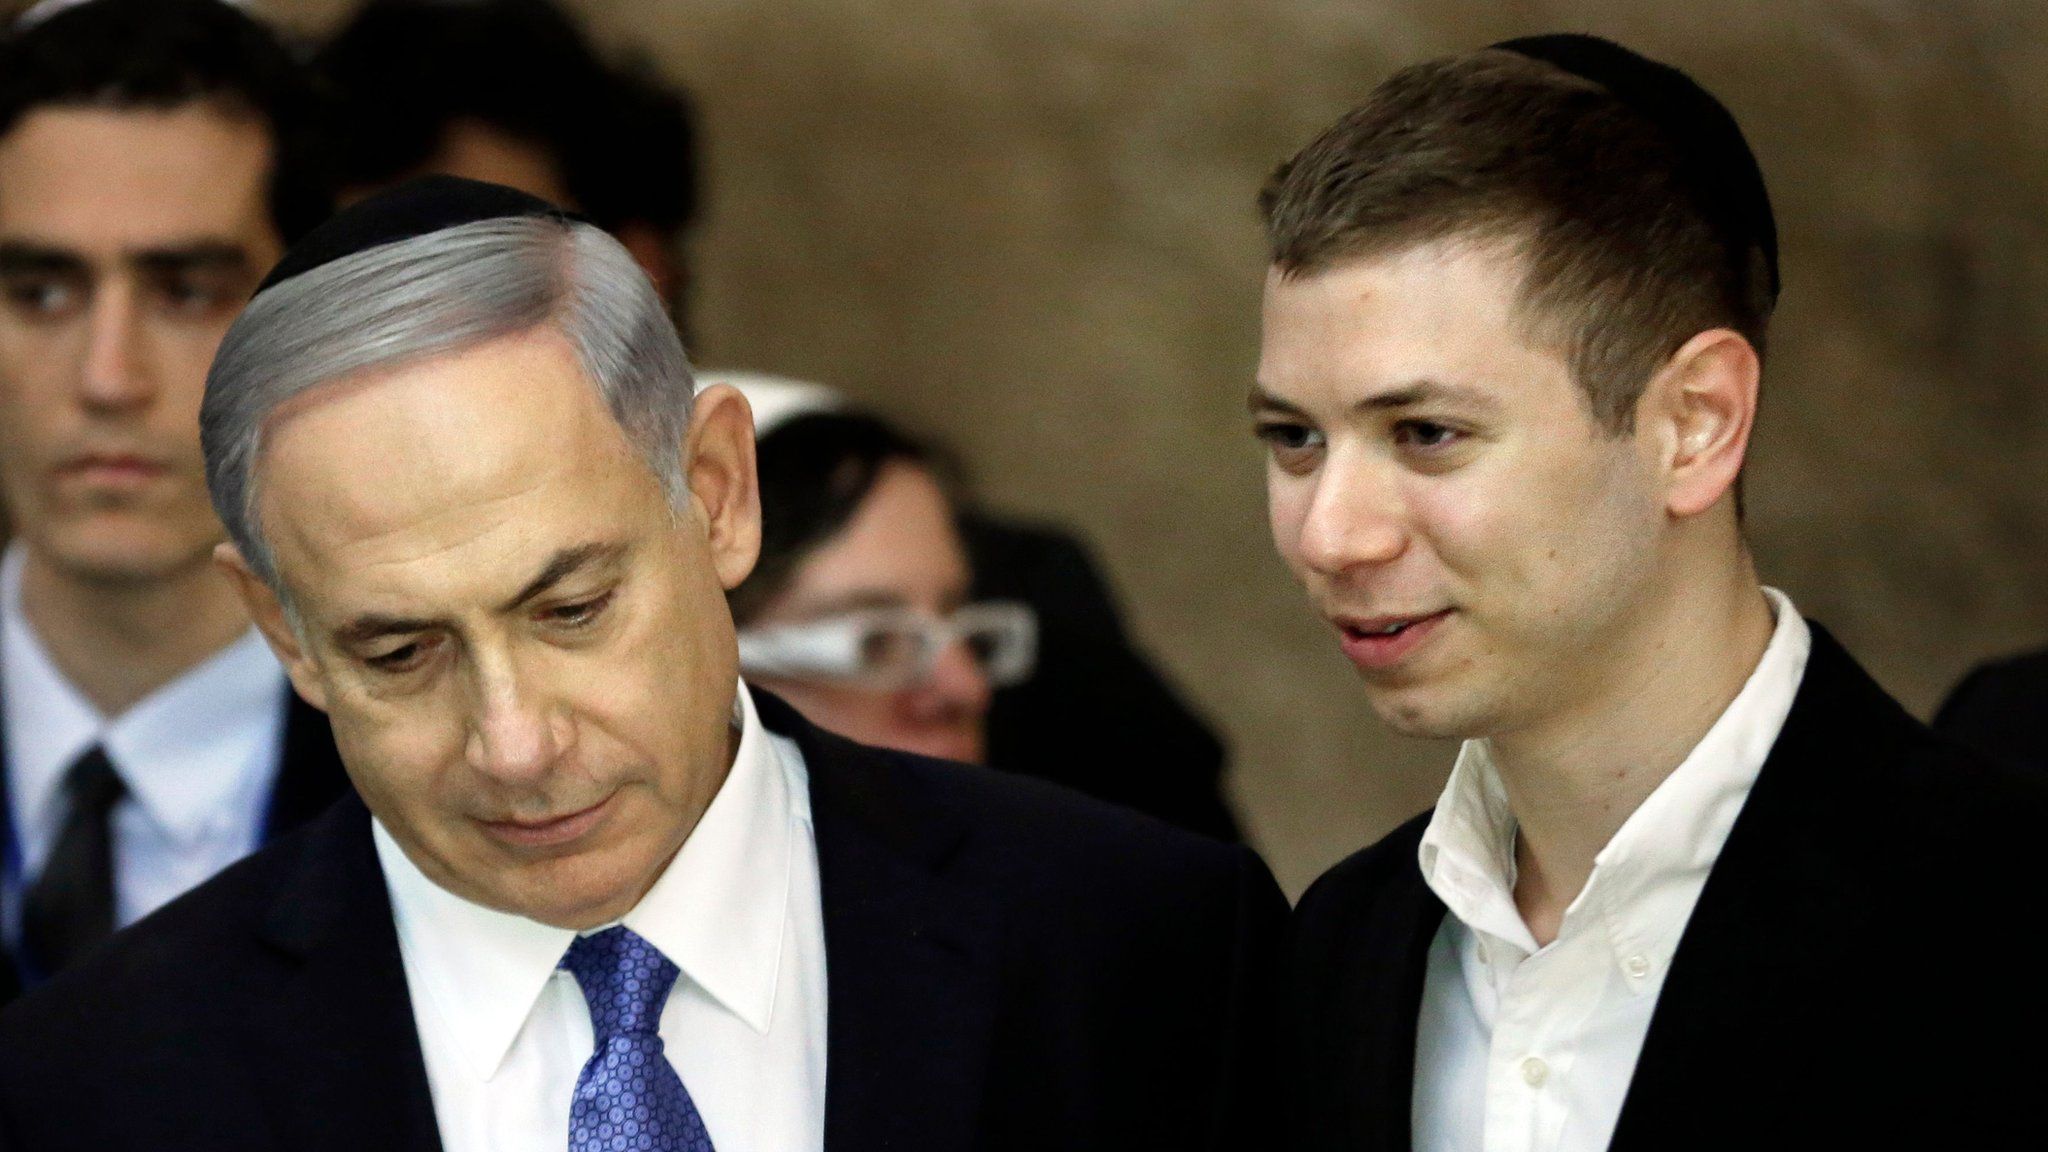 File photo shows Israeli Prime Minister Benjamin Netanyahu (L) and his son Yair visiting the Western Wall in Jerusalem (18 March 2015)